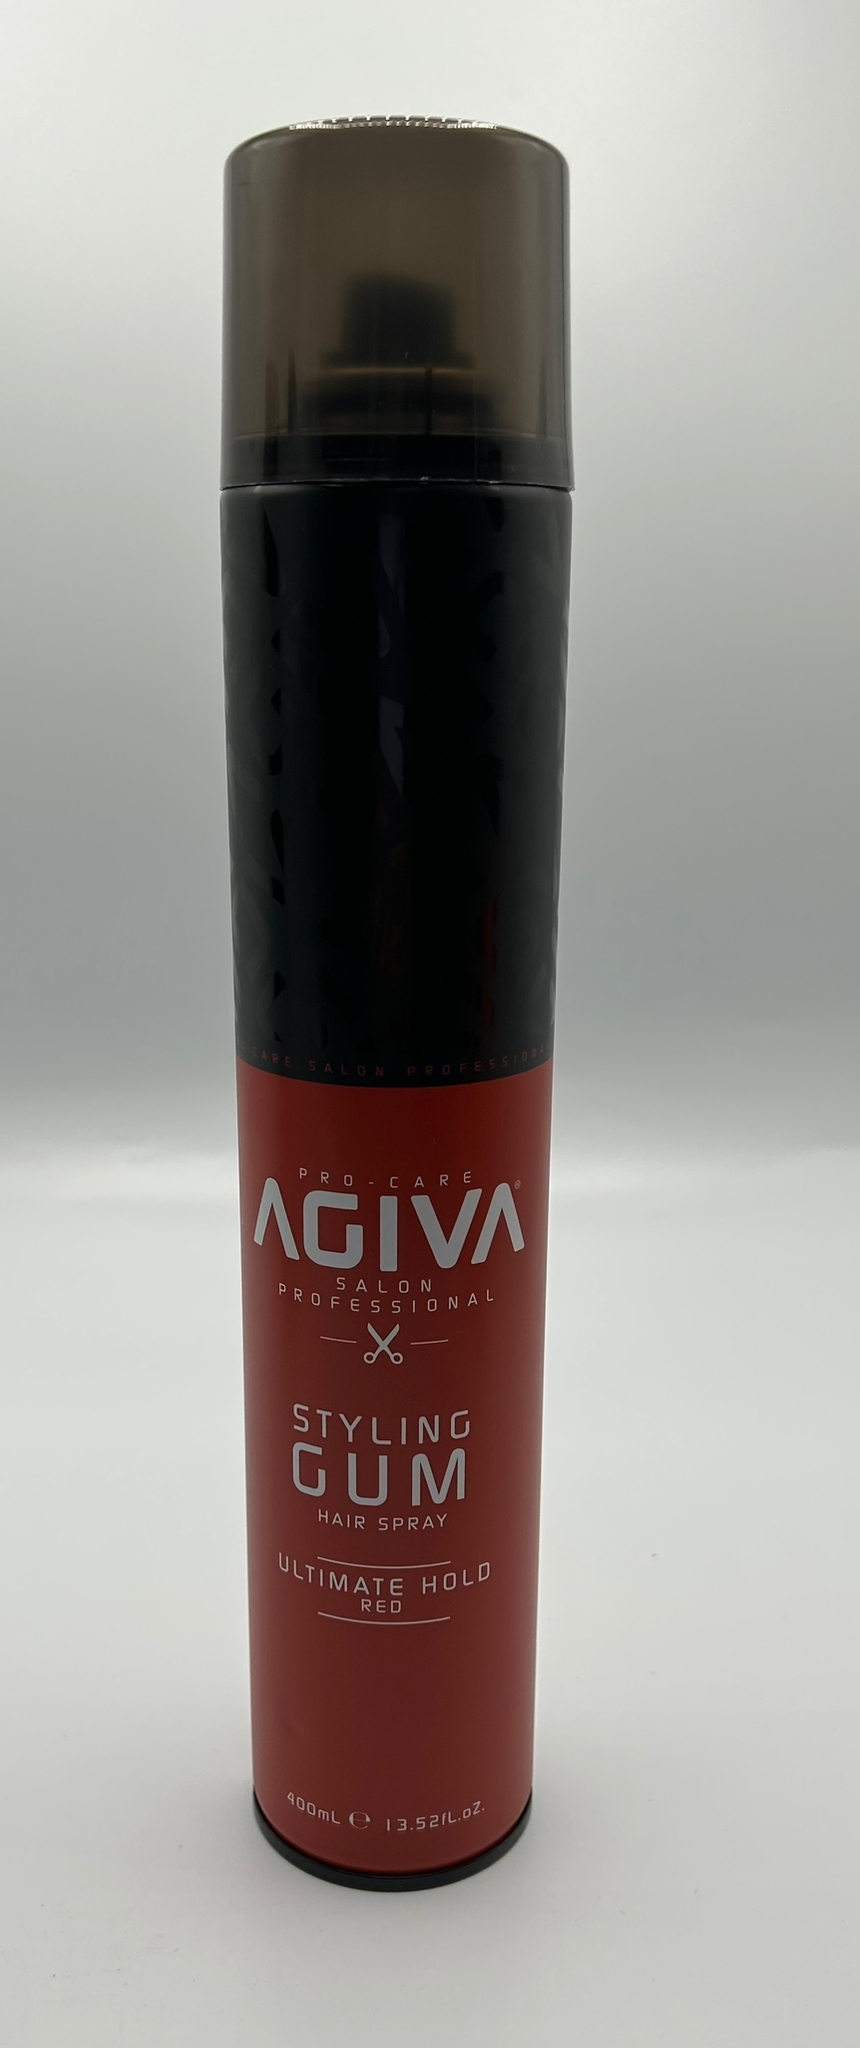 AGIVA HAIR SPRAY STYLING GUM ULTIMATE  HOLD 400ML